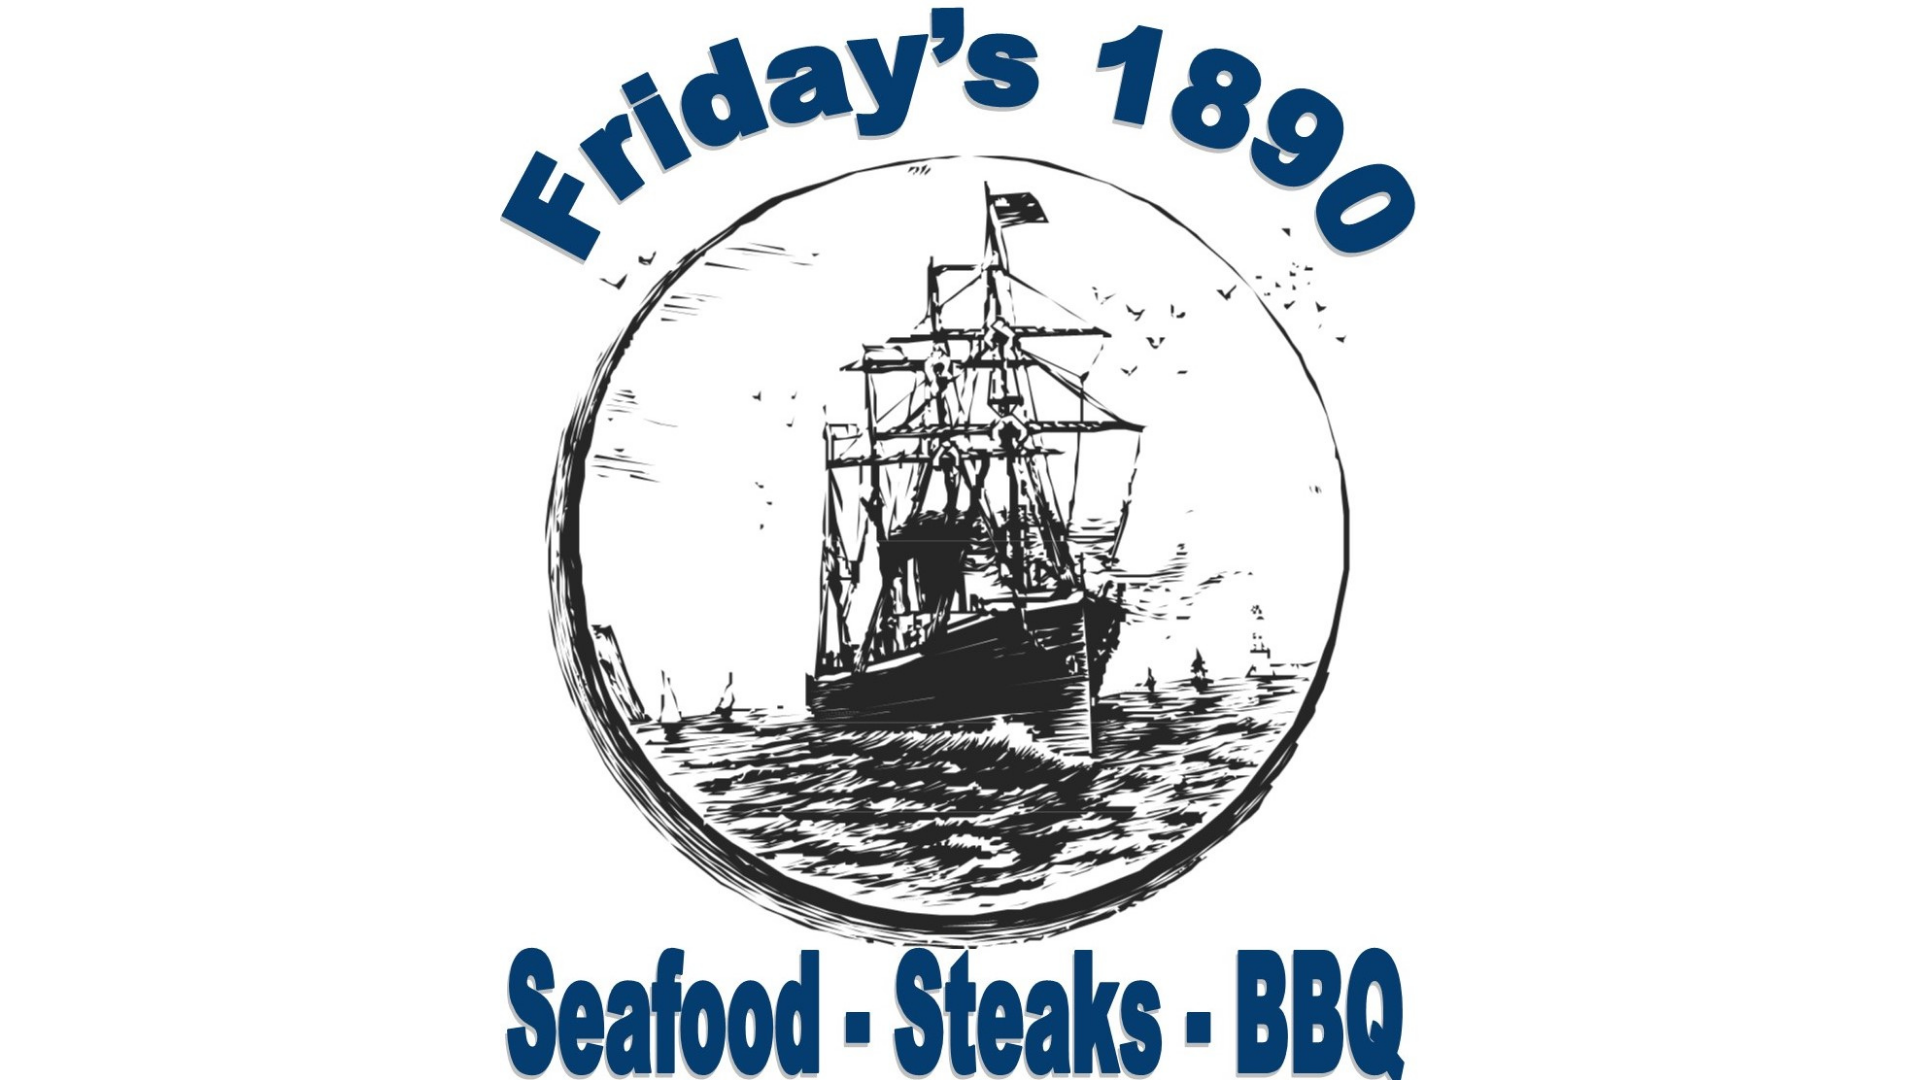 Friday's 1890 Seafood & BBQ